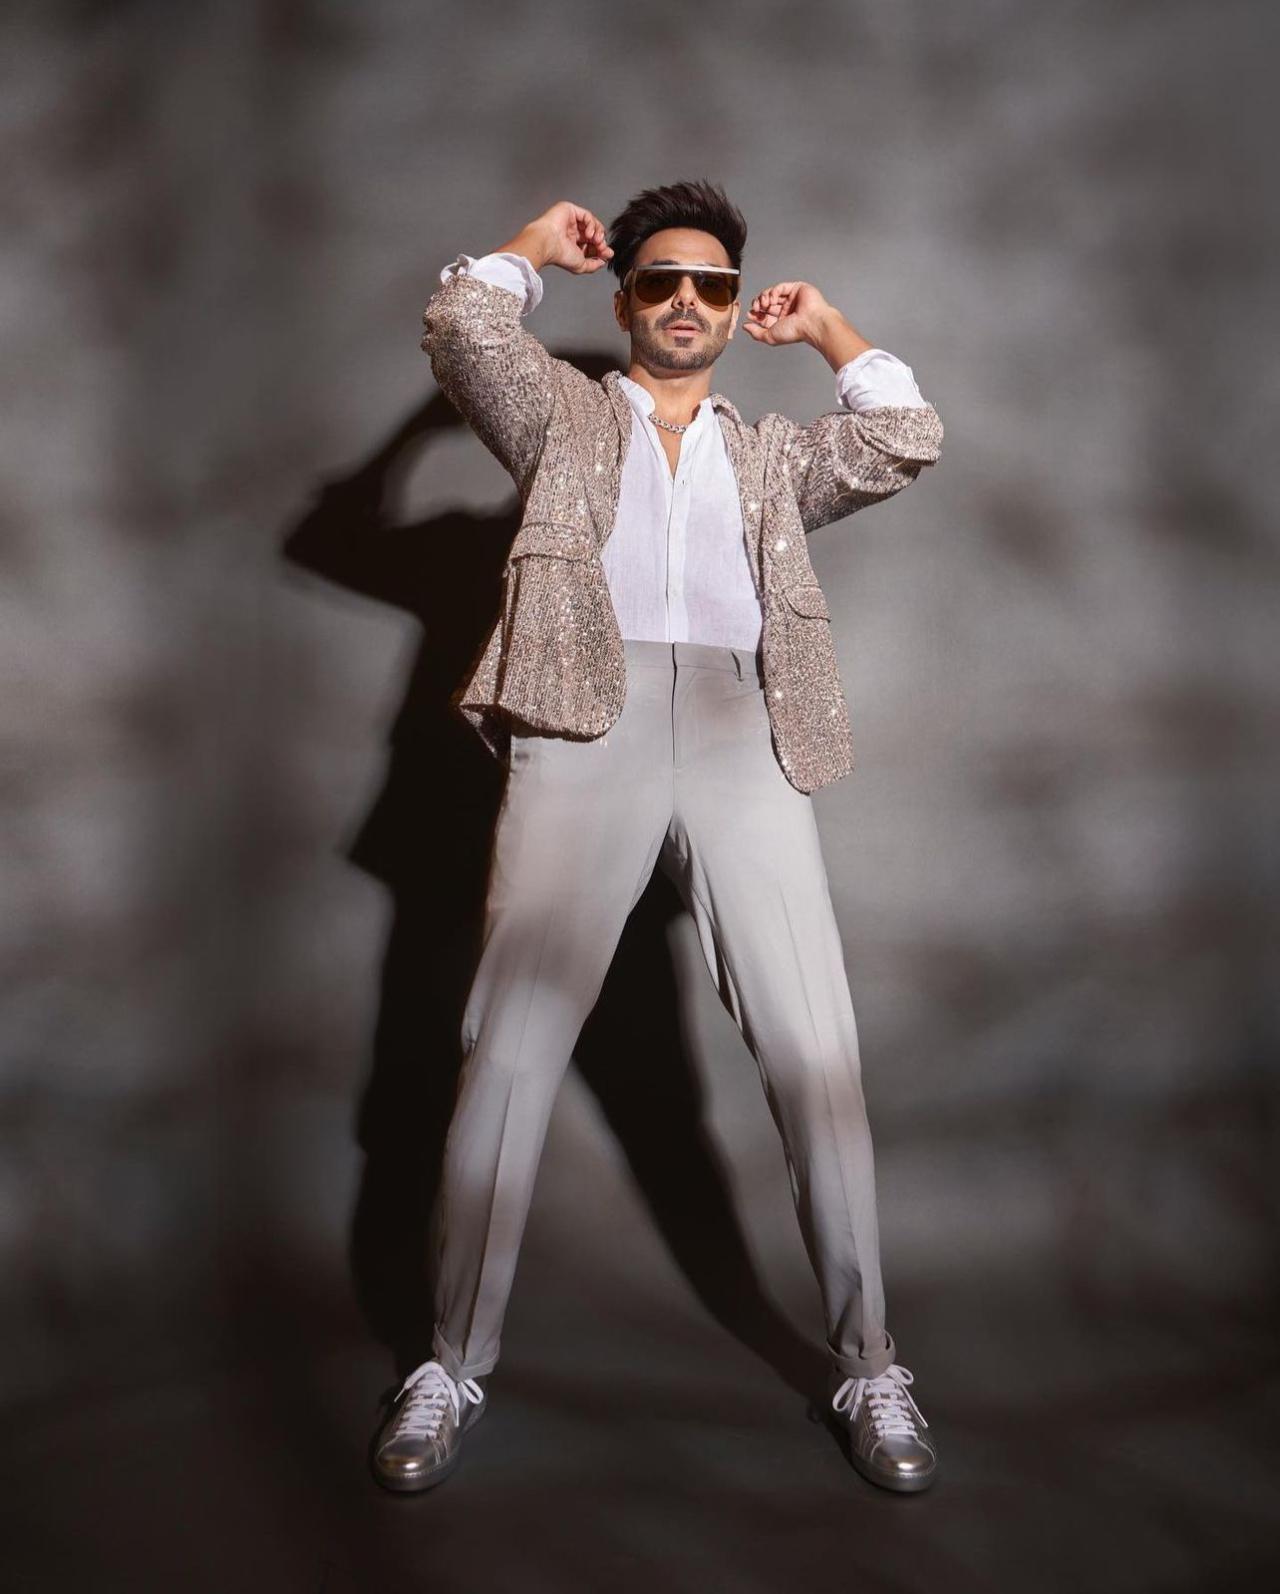 Aparshakti Khurana is not only known for his acting prowess but also for his edgy and stylish fashion choices. Recently, at an award show, he made heads turn with a white shirt, grey pants, and an offbeat sparkly blazer. Paired with uber-cool shades, Aparshakti's fashion sense exudes confidence and a willingness to stand out from the crowd.